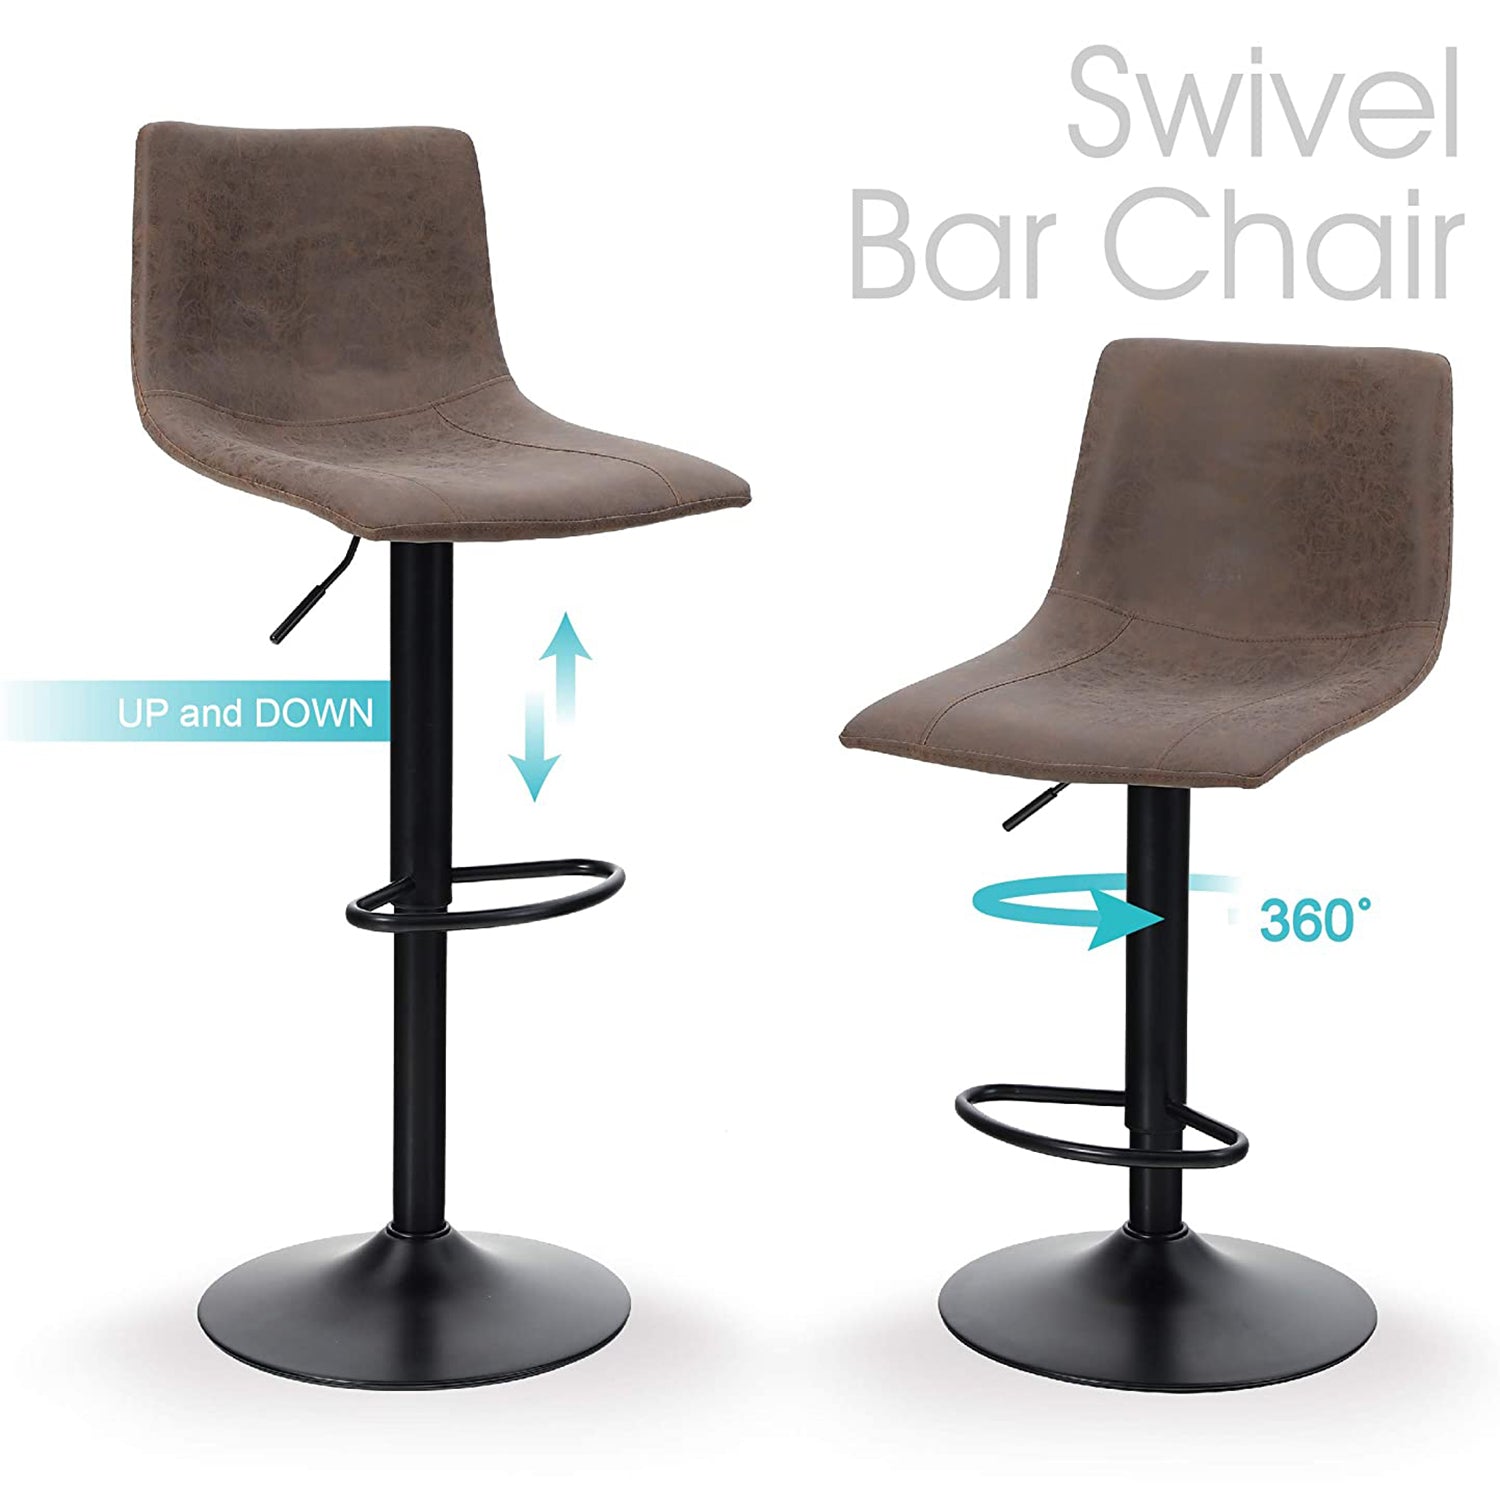 PHI VILLA Square Adjustable Height Leather and Metal Swivel Bar Stools